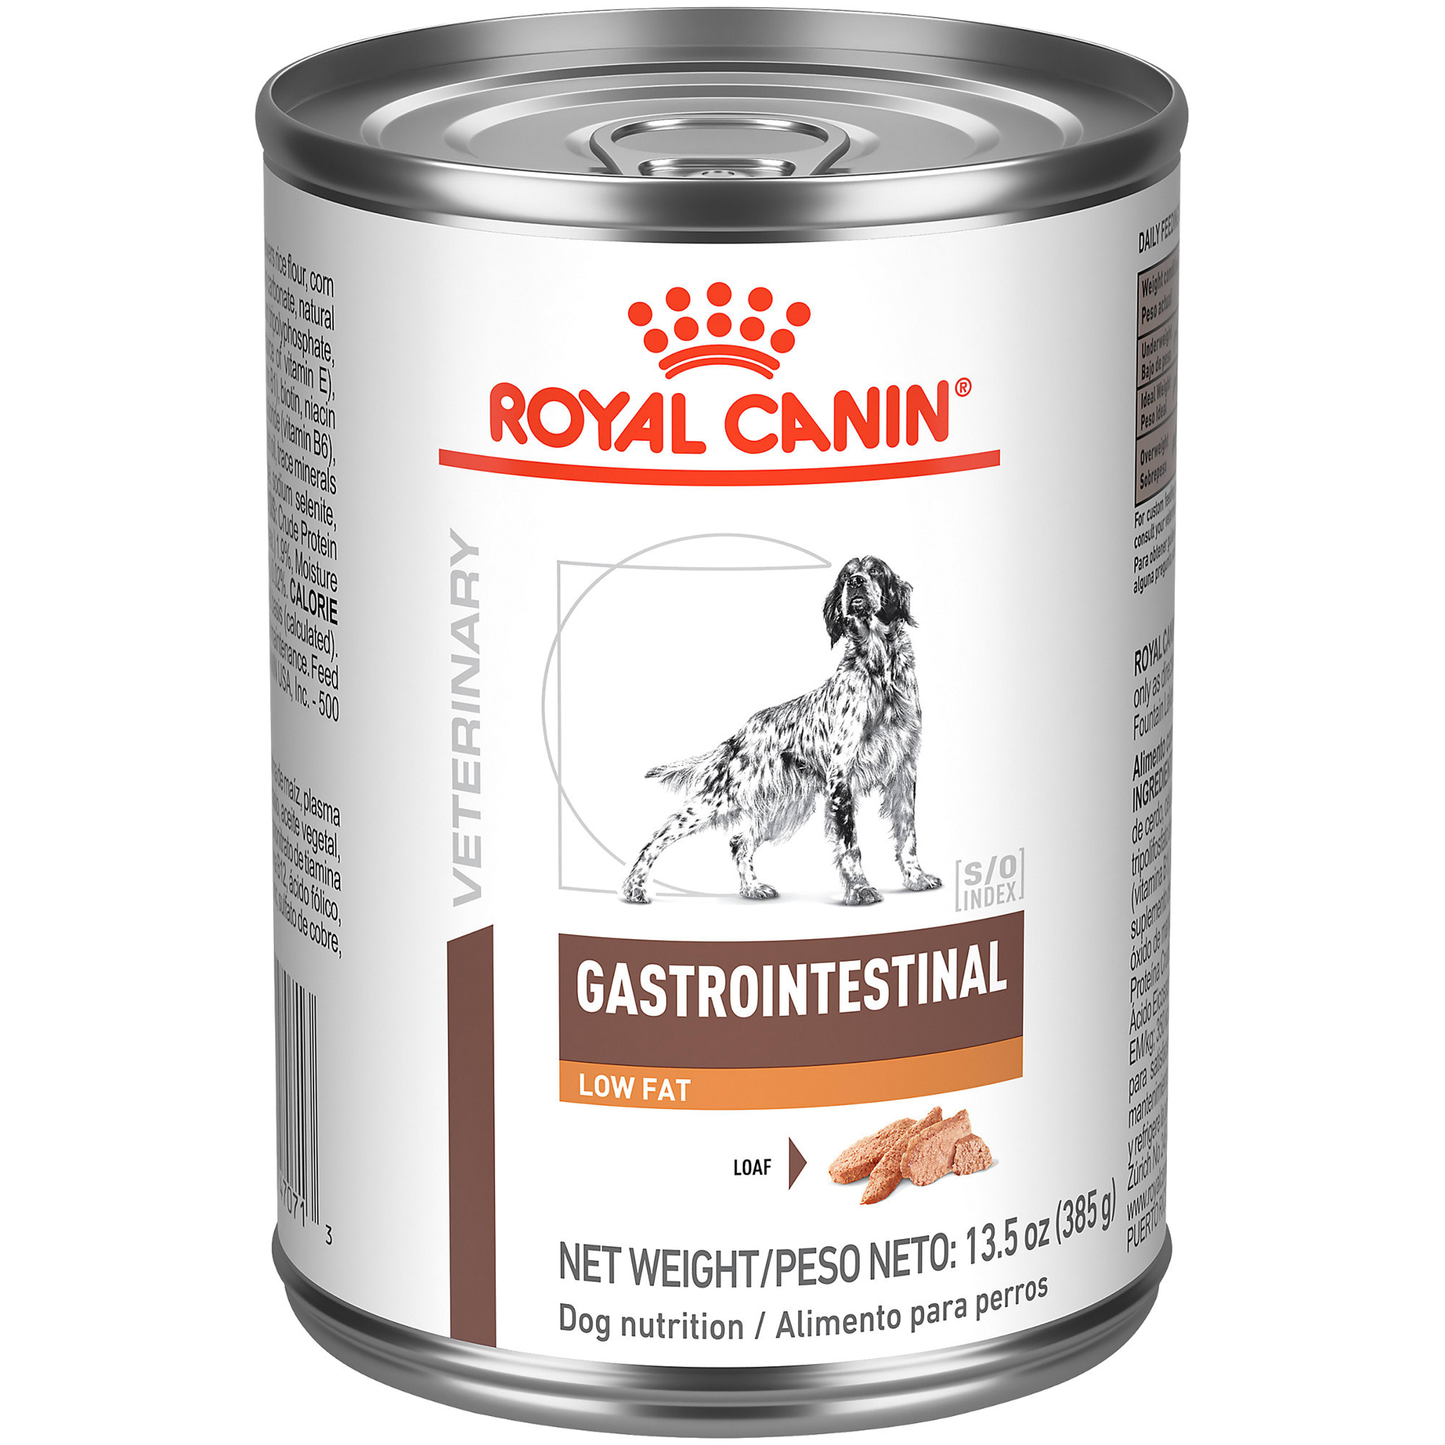 Royal Canin Gastrointestinal Low Fat (per can)